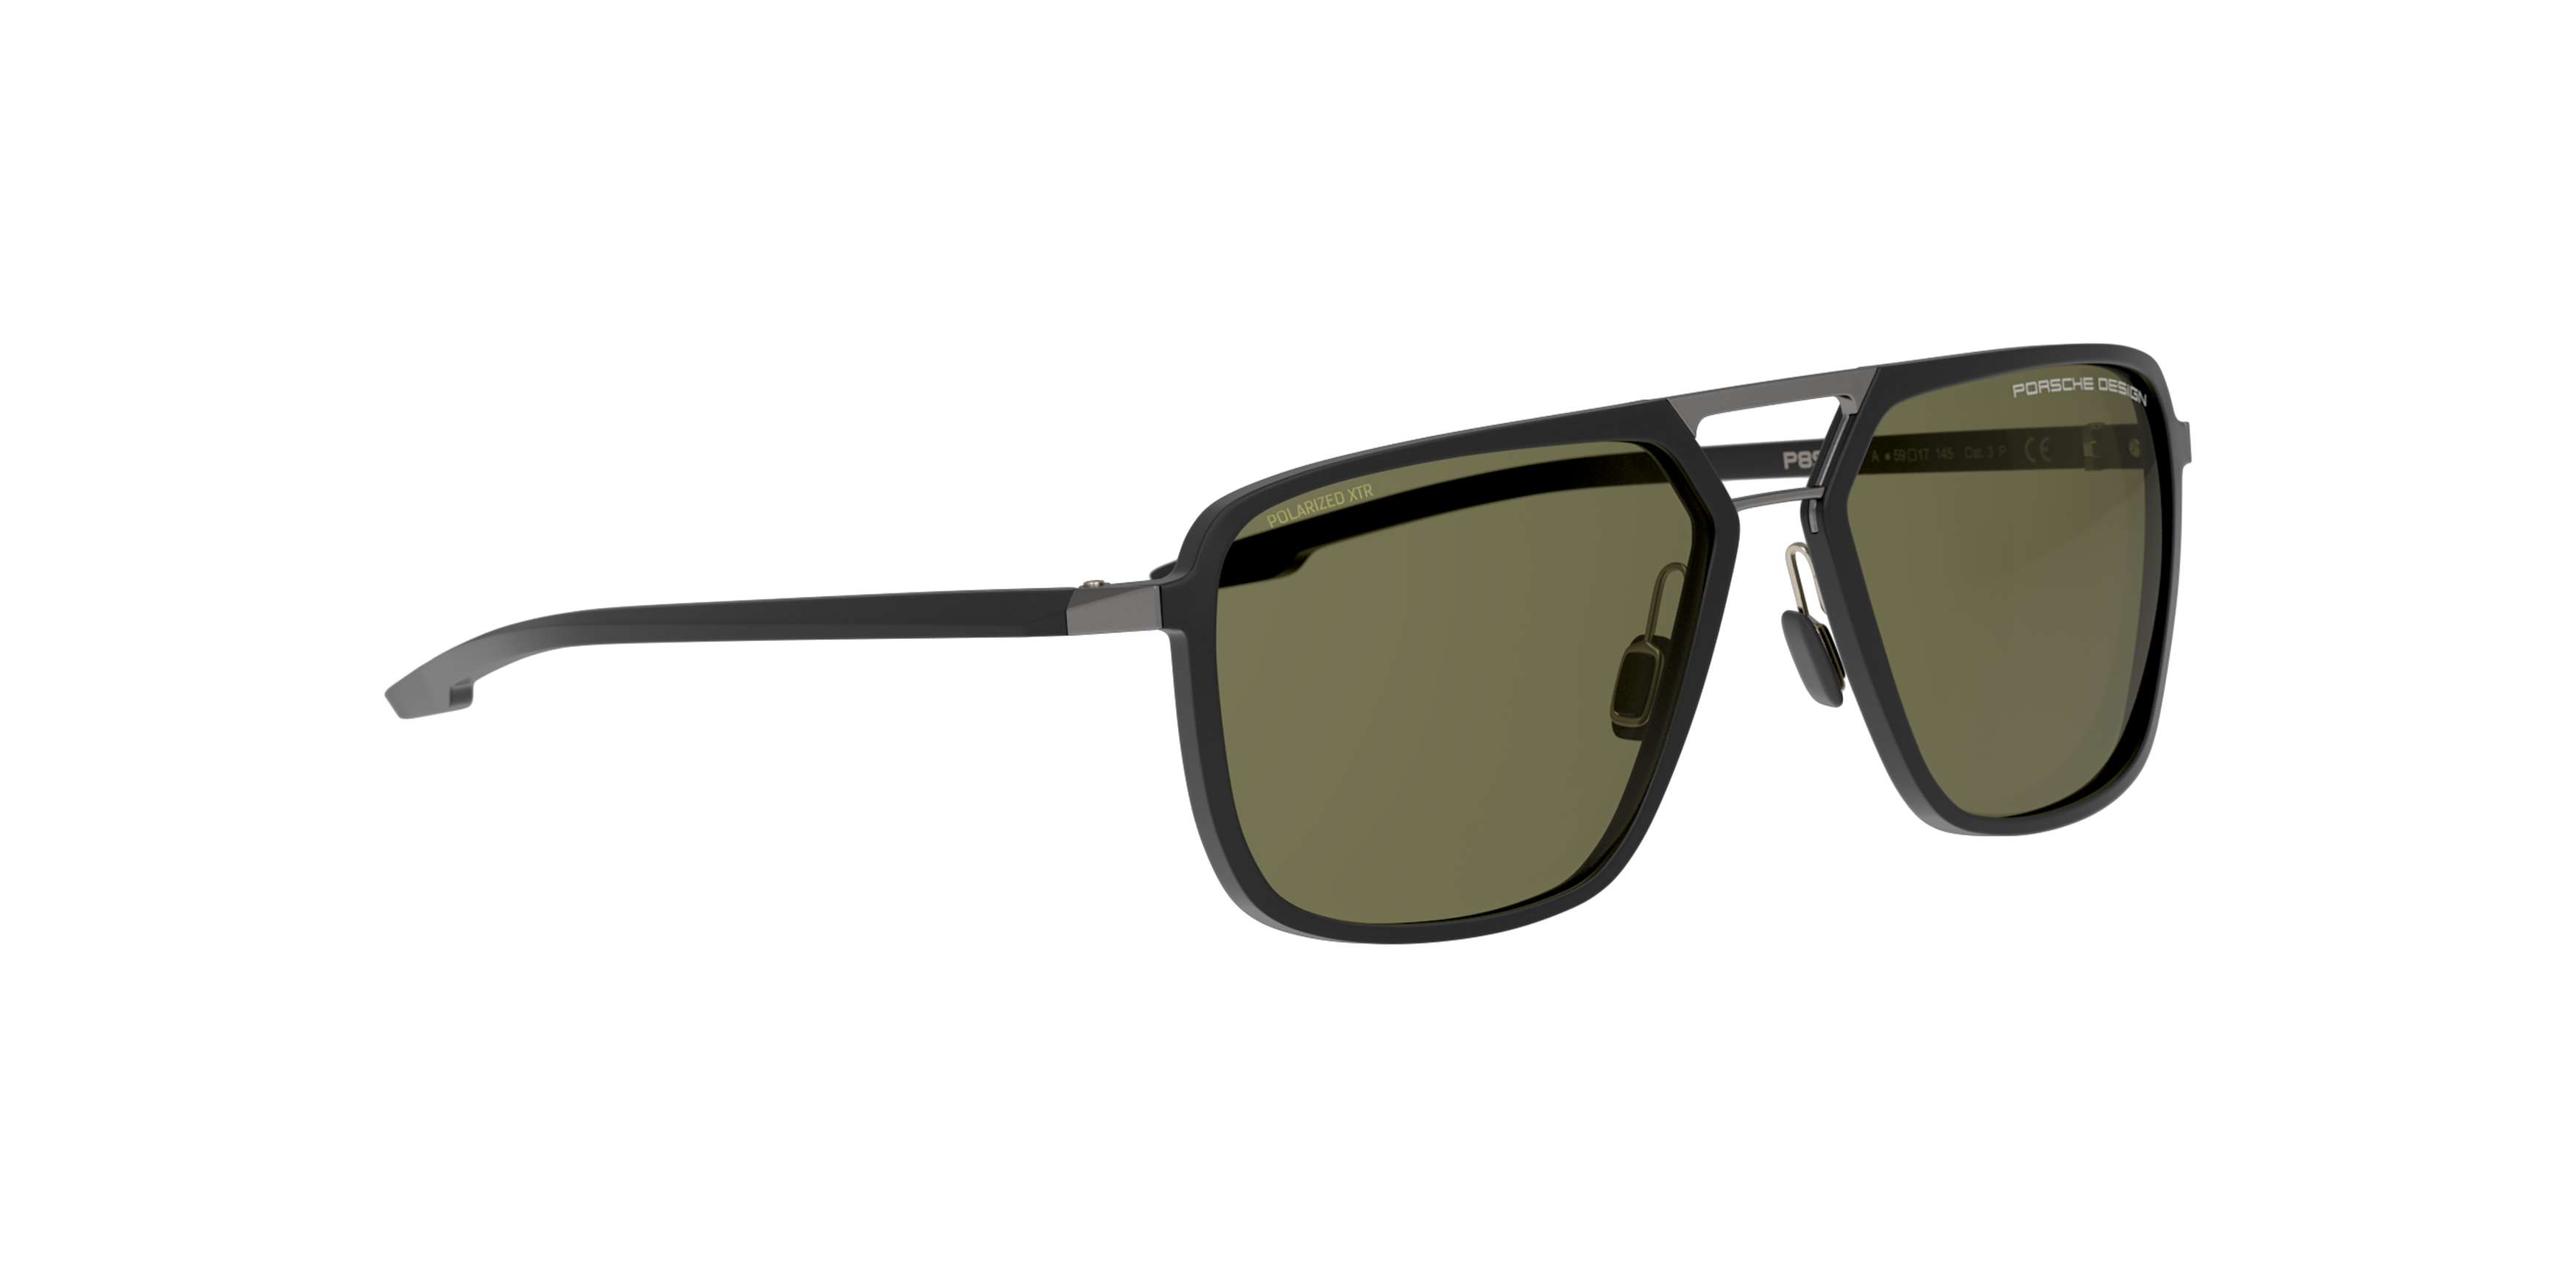 [products.image.angle_right01] PORSCHE DESIGN P8934 A